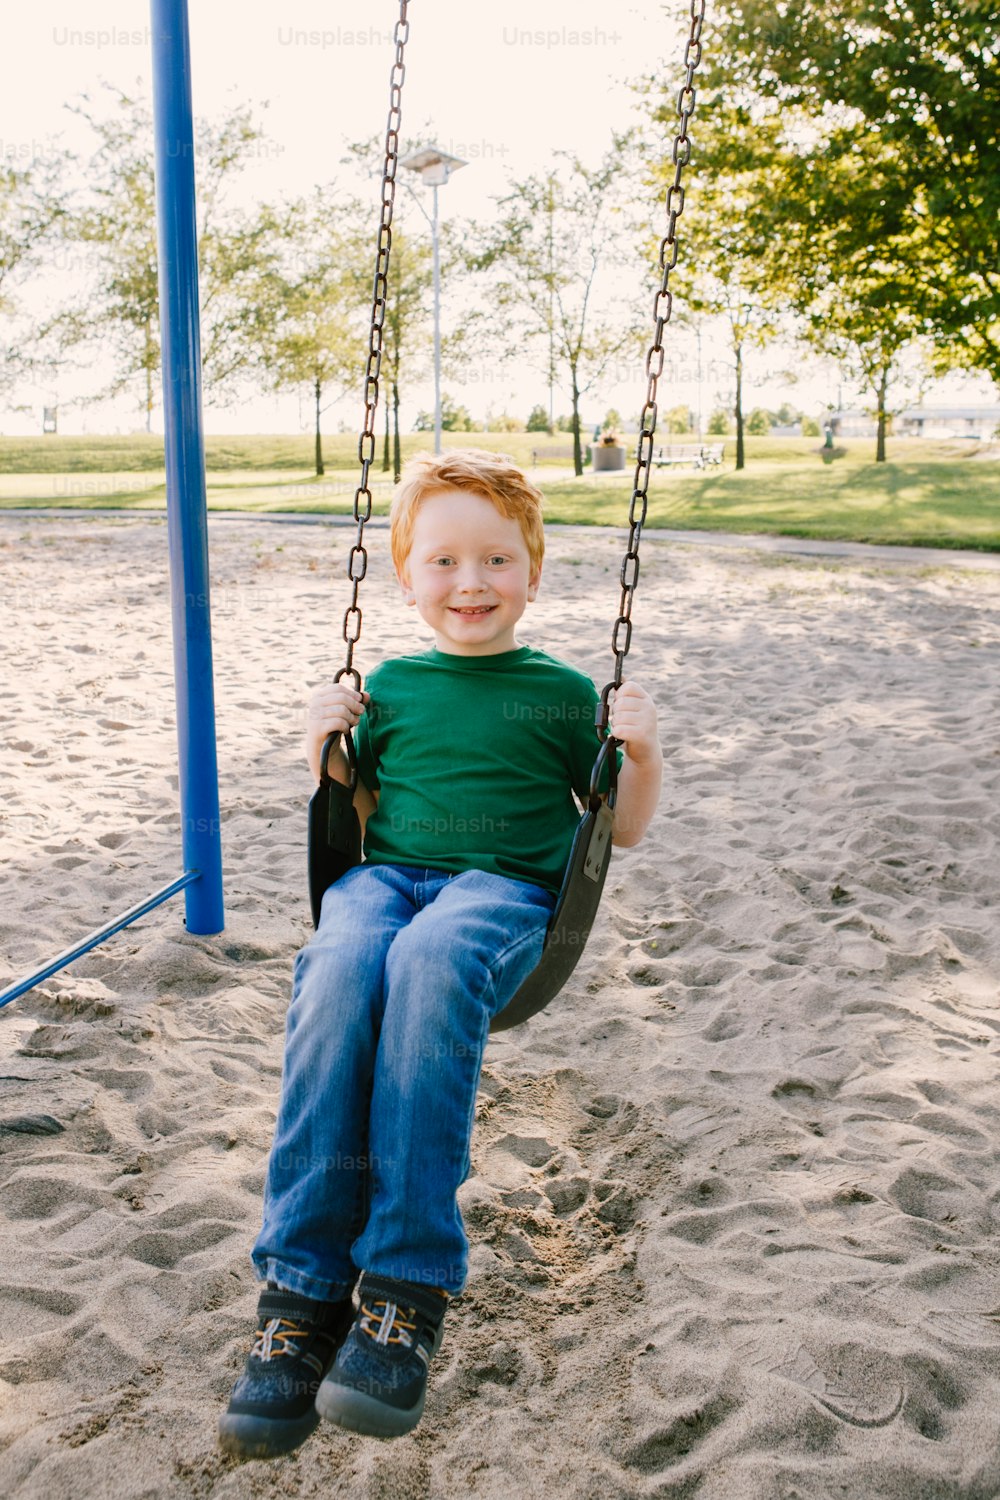 Happy smiling little preschool boy swinging on swing-set playground outside on summer day. Happy childhood lifestyle concept. Seasonal outdoor activity for kids.